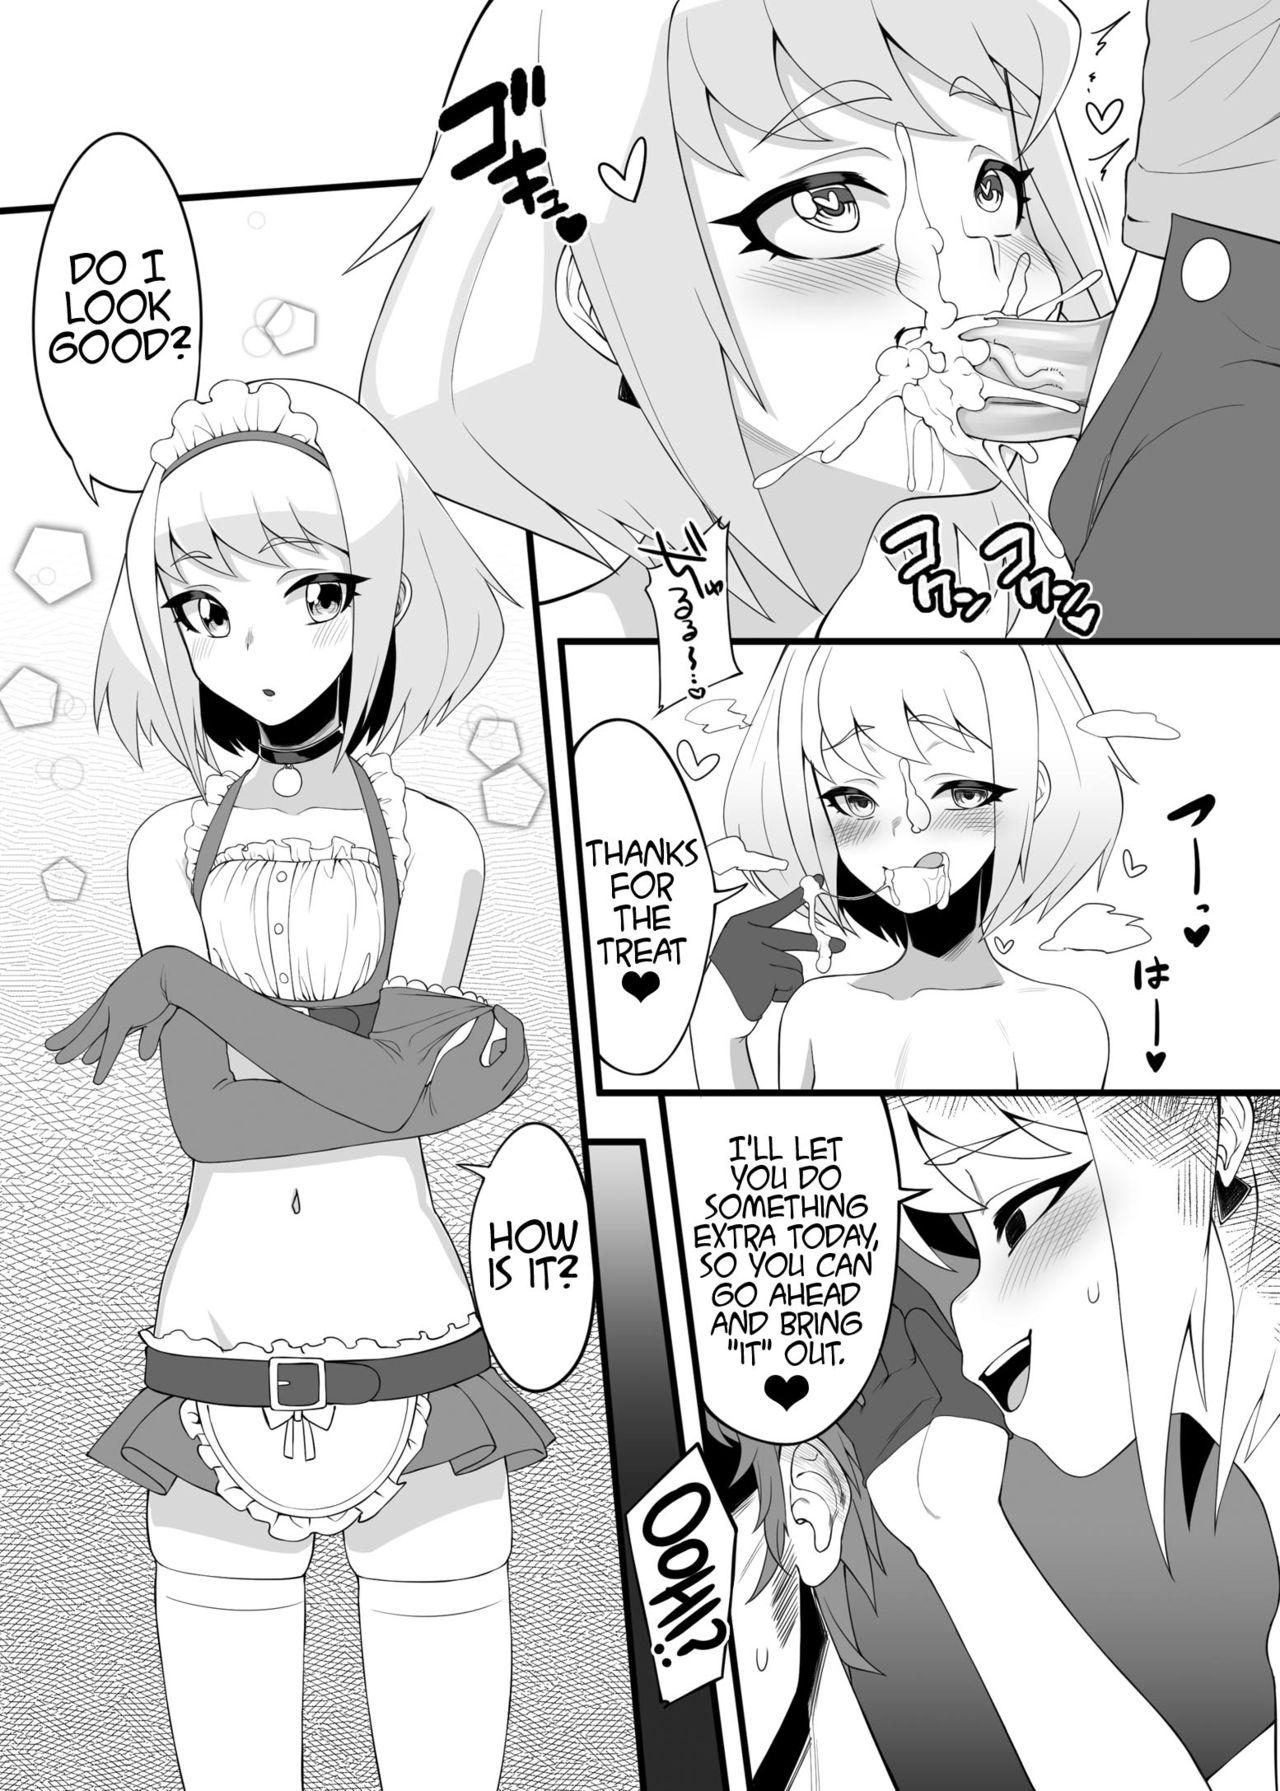 Lovers Managing the Sexual Frustrations of the Burning Rescue | Ranshaozhemen de Xingyu Chuli - Promare Amateurs Gone Wild - Page 8